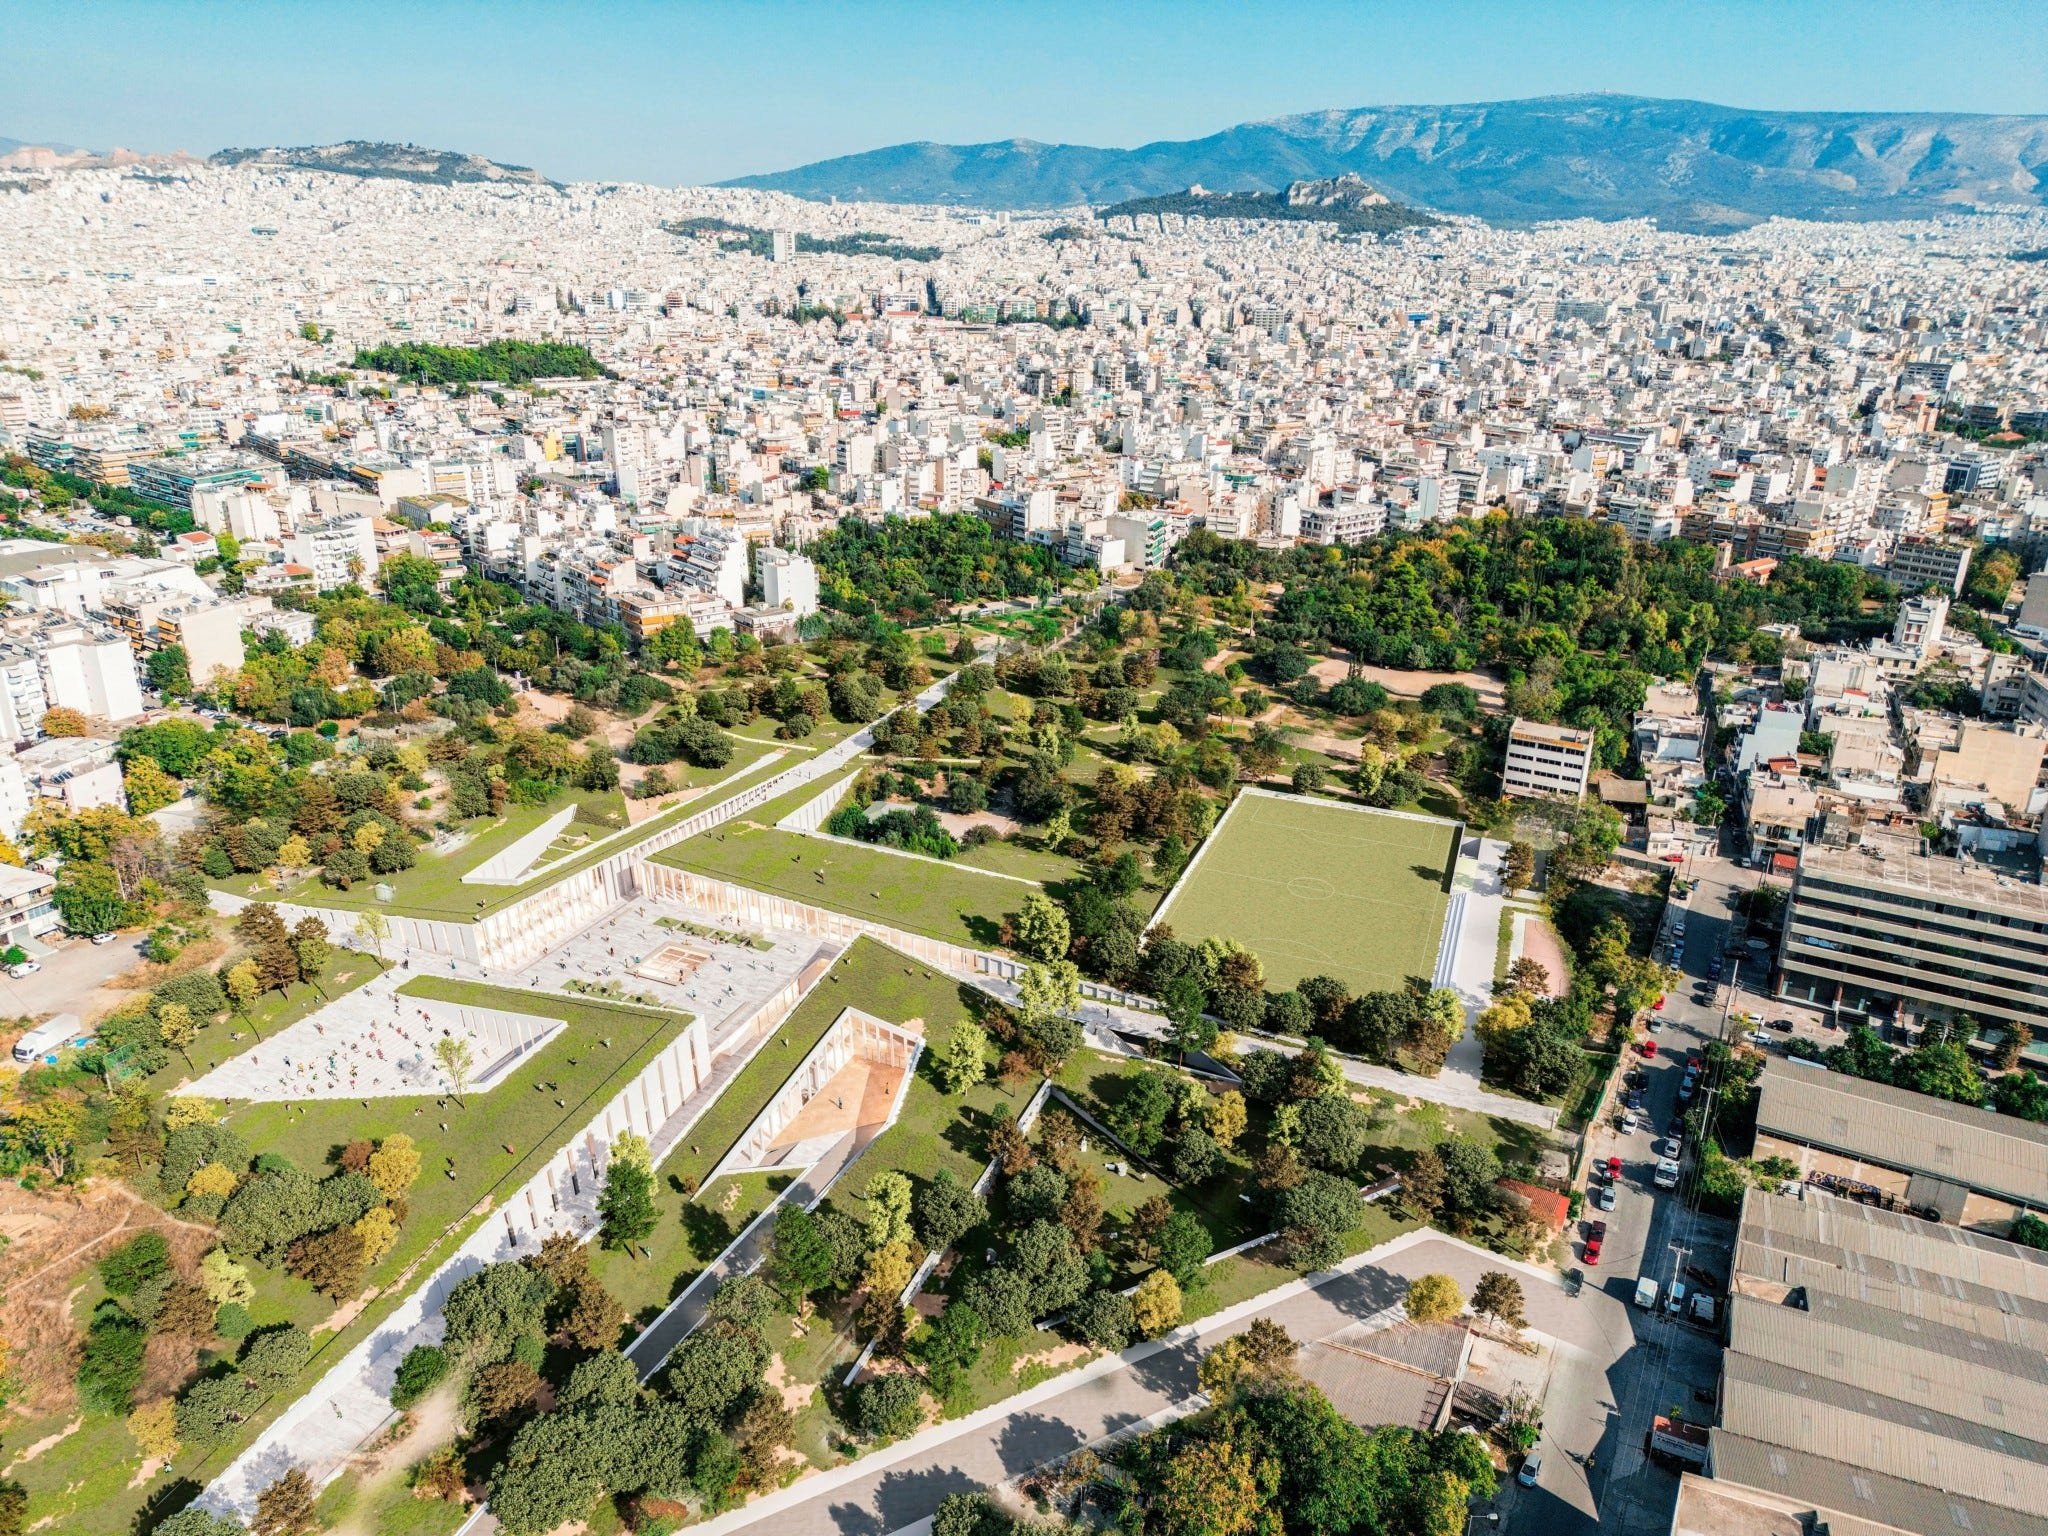 This is how the new Archaeological Museum of Athens will be, which will forever change the Plato Academy